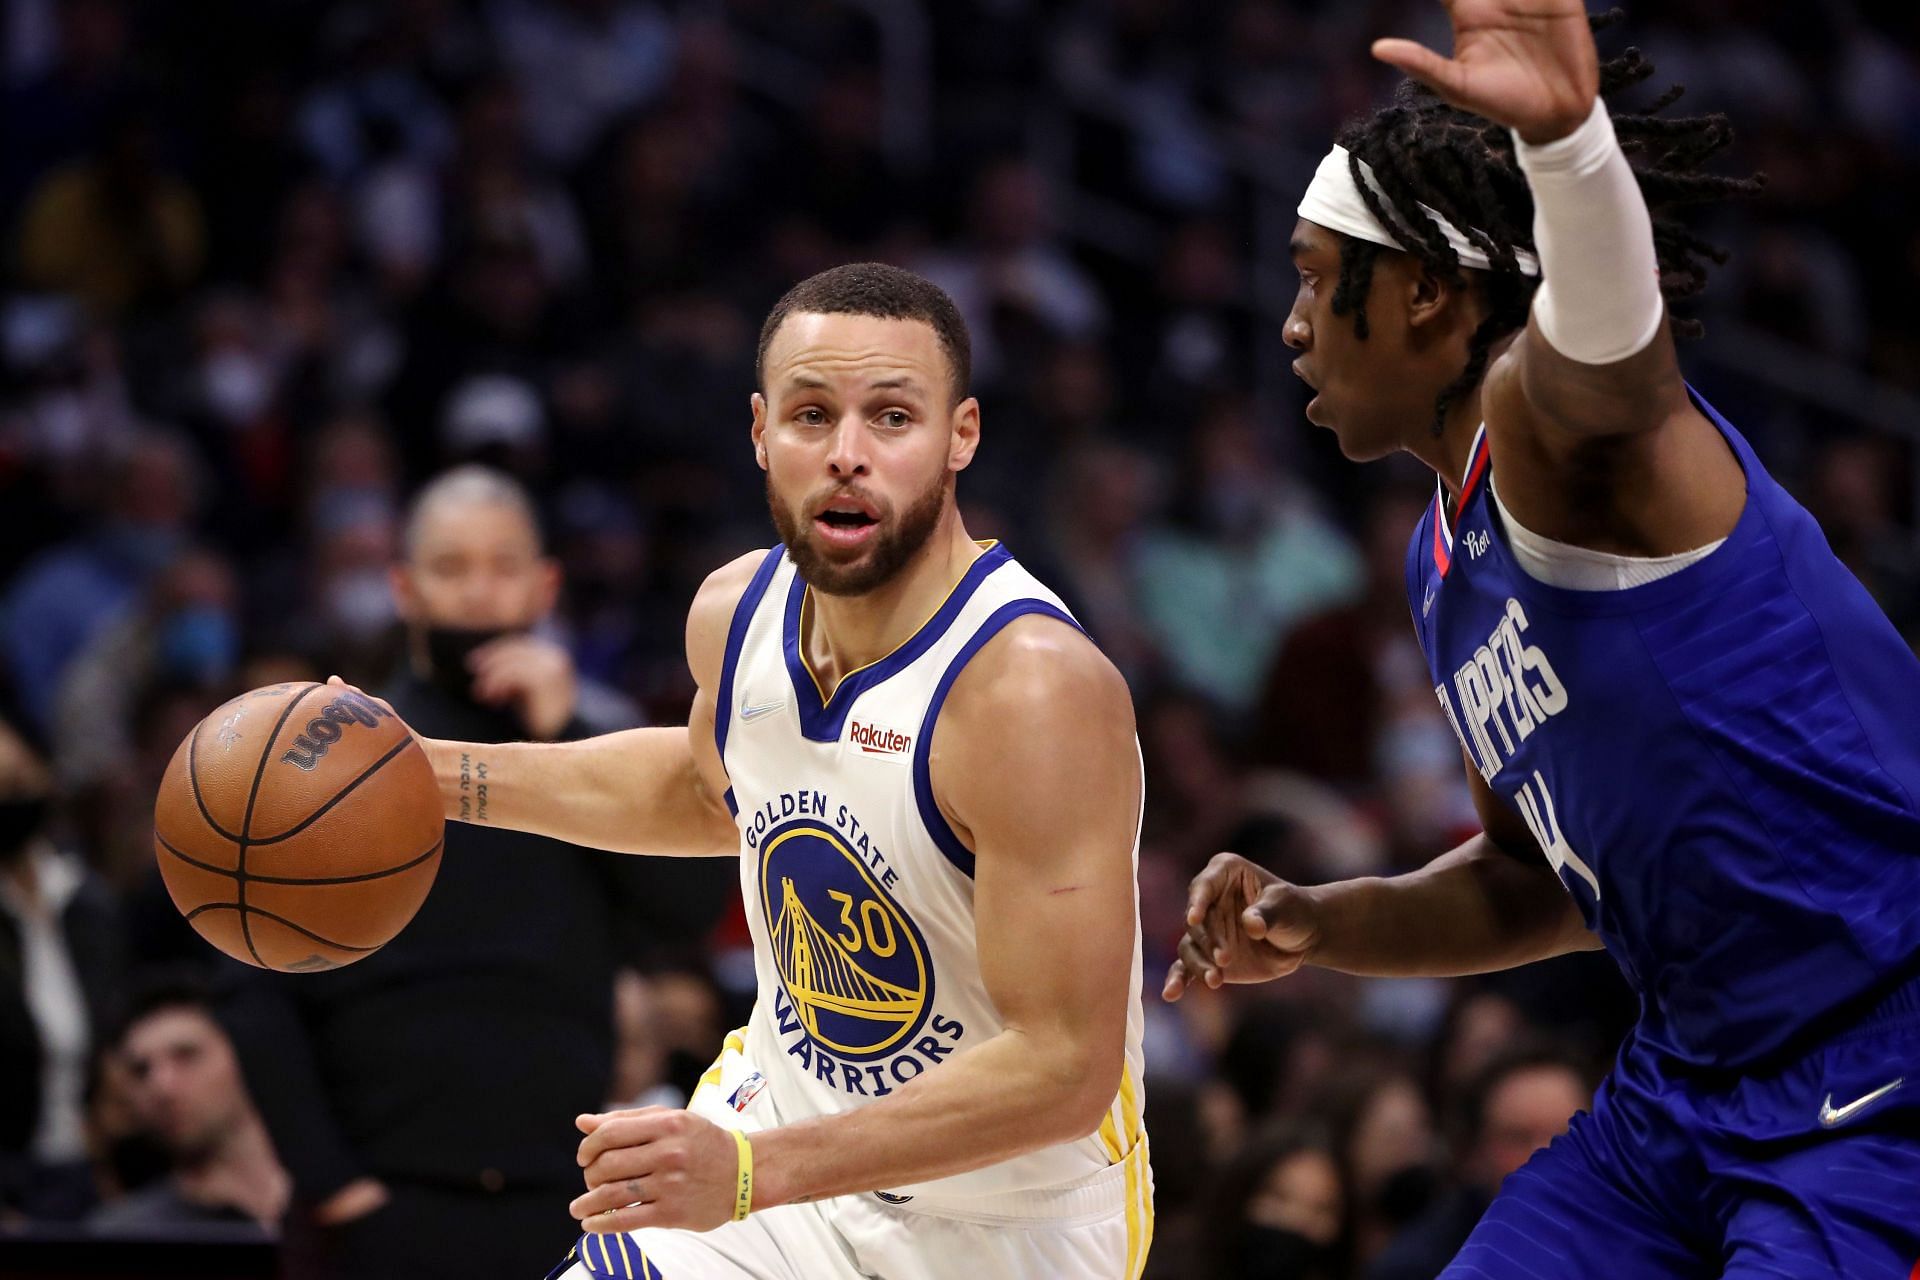 Steph Curry of the Golden State Warriors dribbles against Terance Mann of the LA Clippers during the third quarter at Crypto.com Arena on Monday in Los Angeles, California.